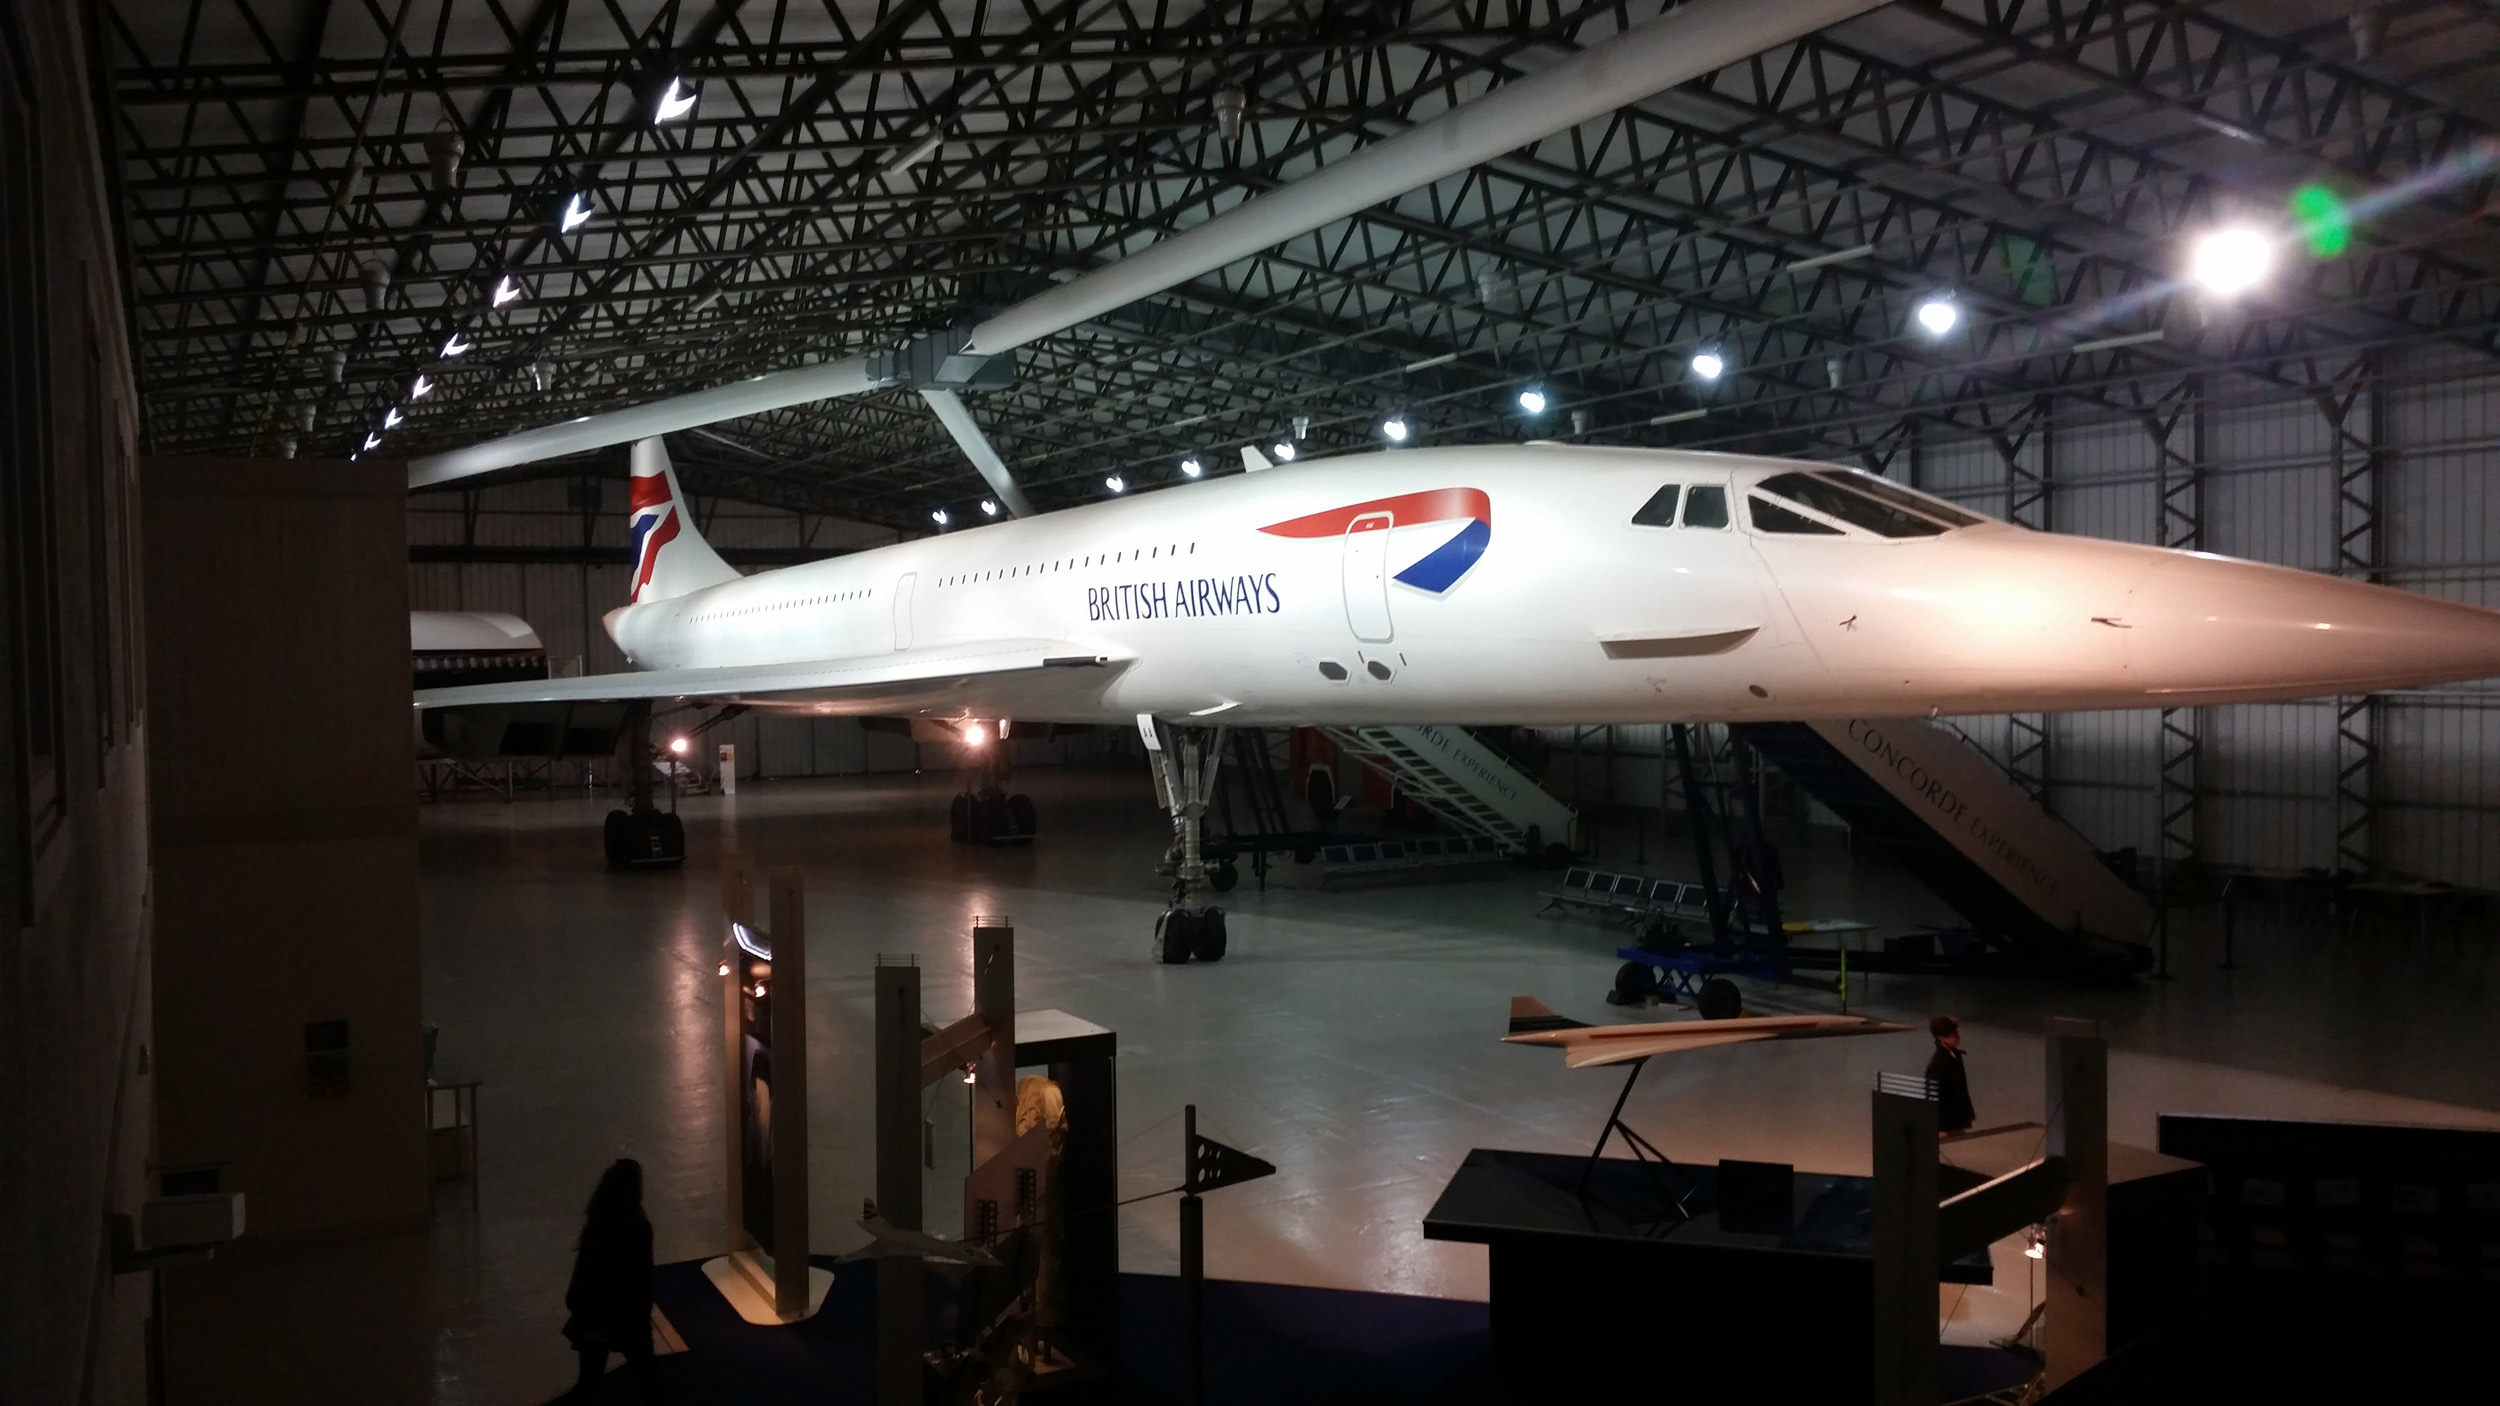 Concorde at the National Museum of Flight.